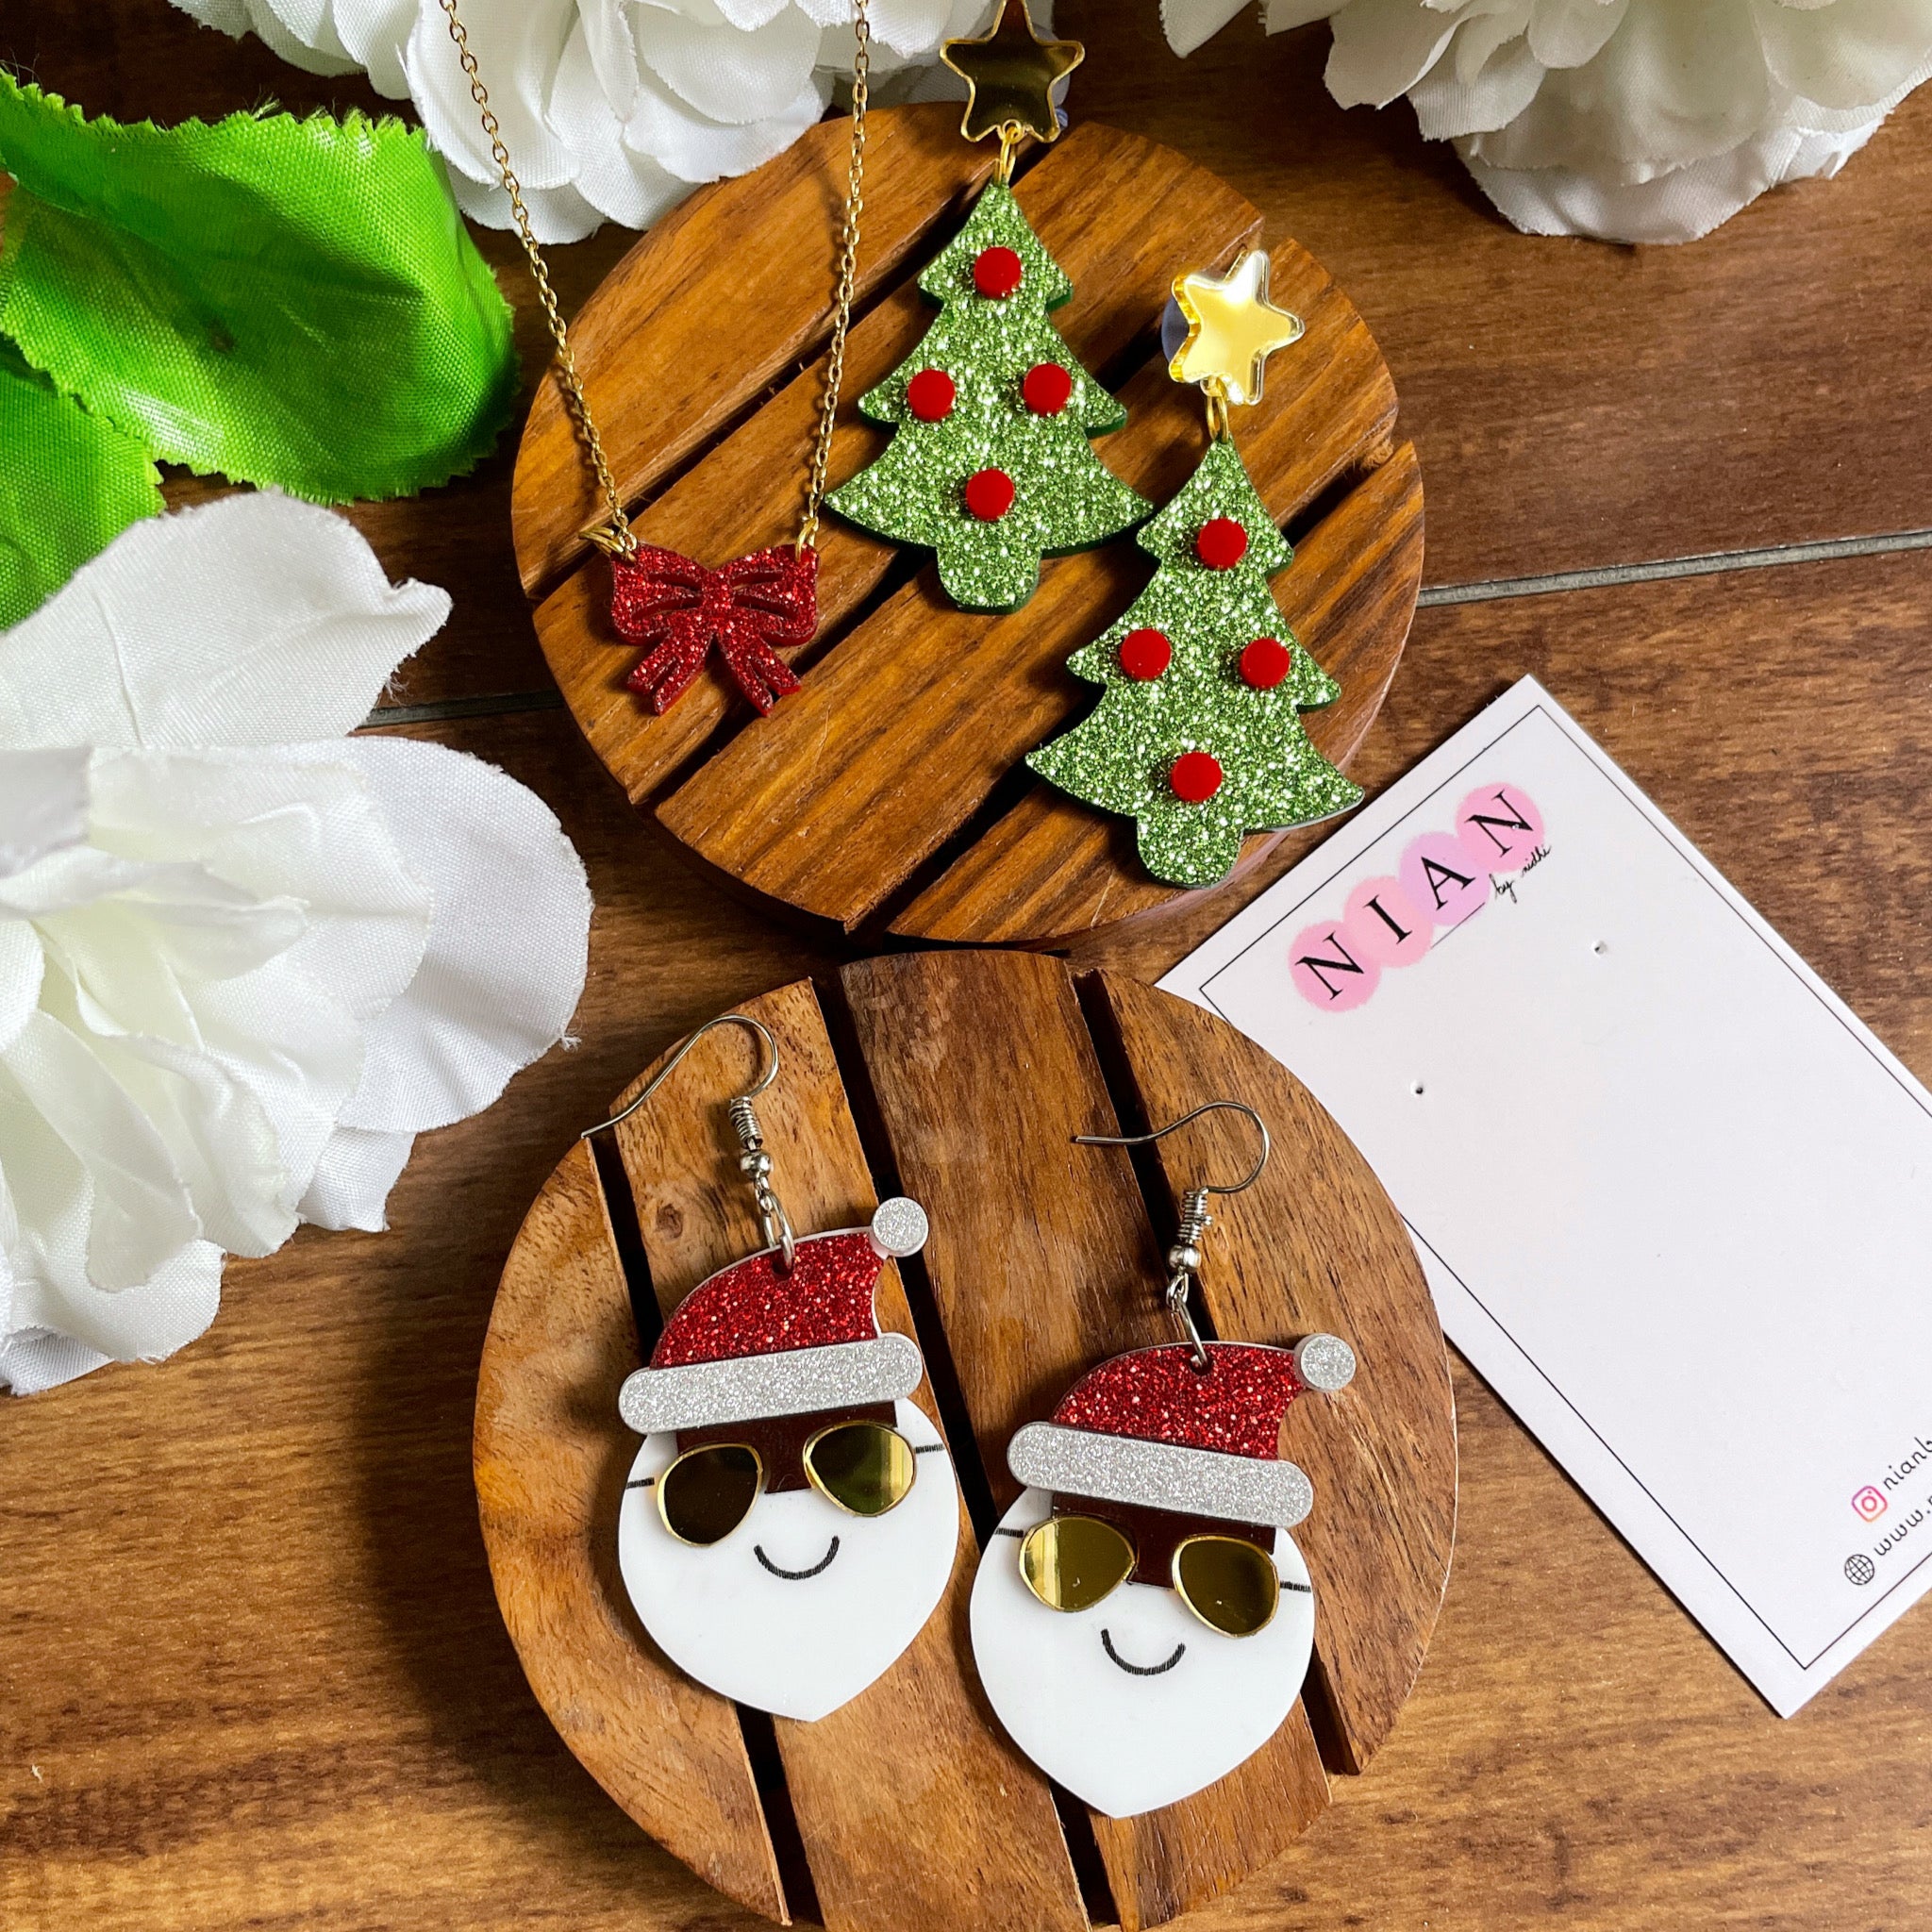 The Jingle Edition - consists 3 products - Yo Santa Earrings, Xmas Tree Earrings, and Bow Necklace - Nian by Nidhi - placed in a brown background along with a Nian by Nidhi earring card - Shimmer Green, Red, White, Shimmer Red